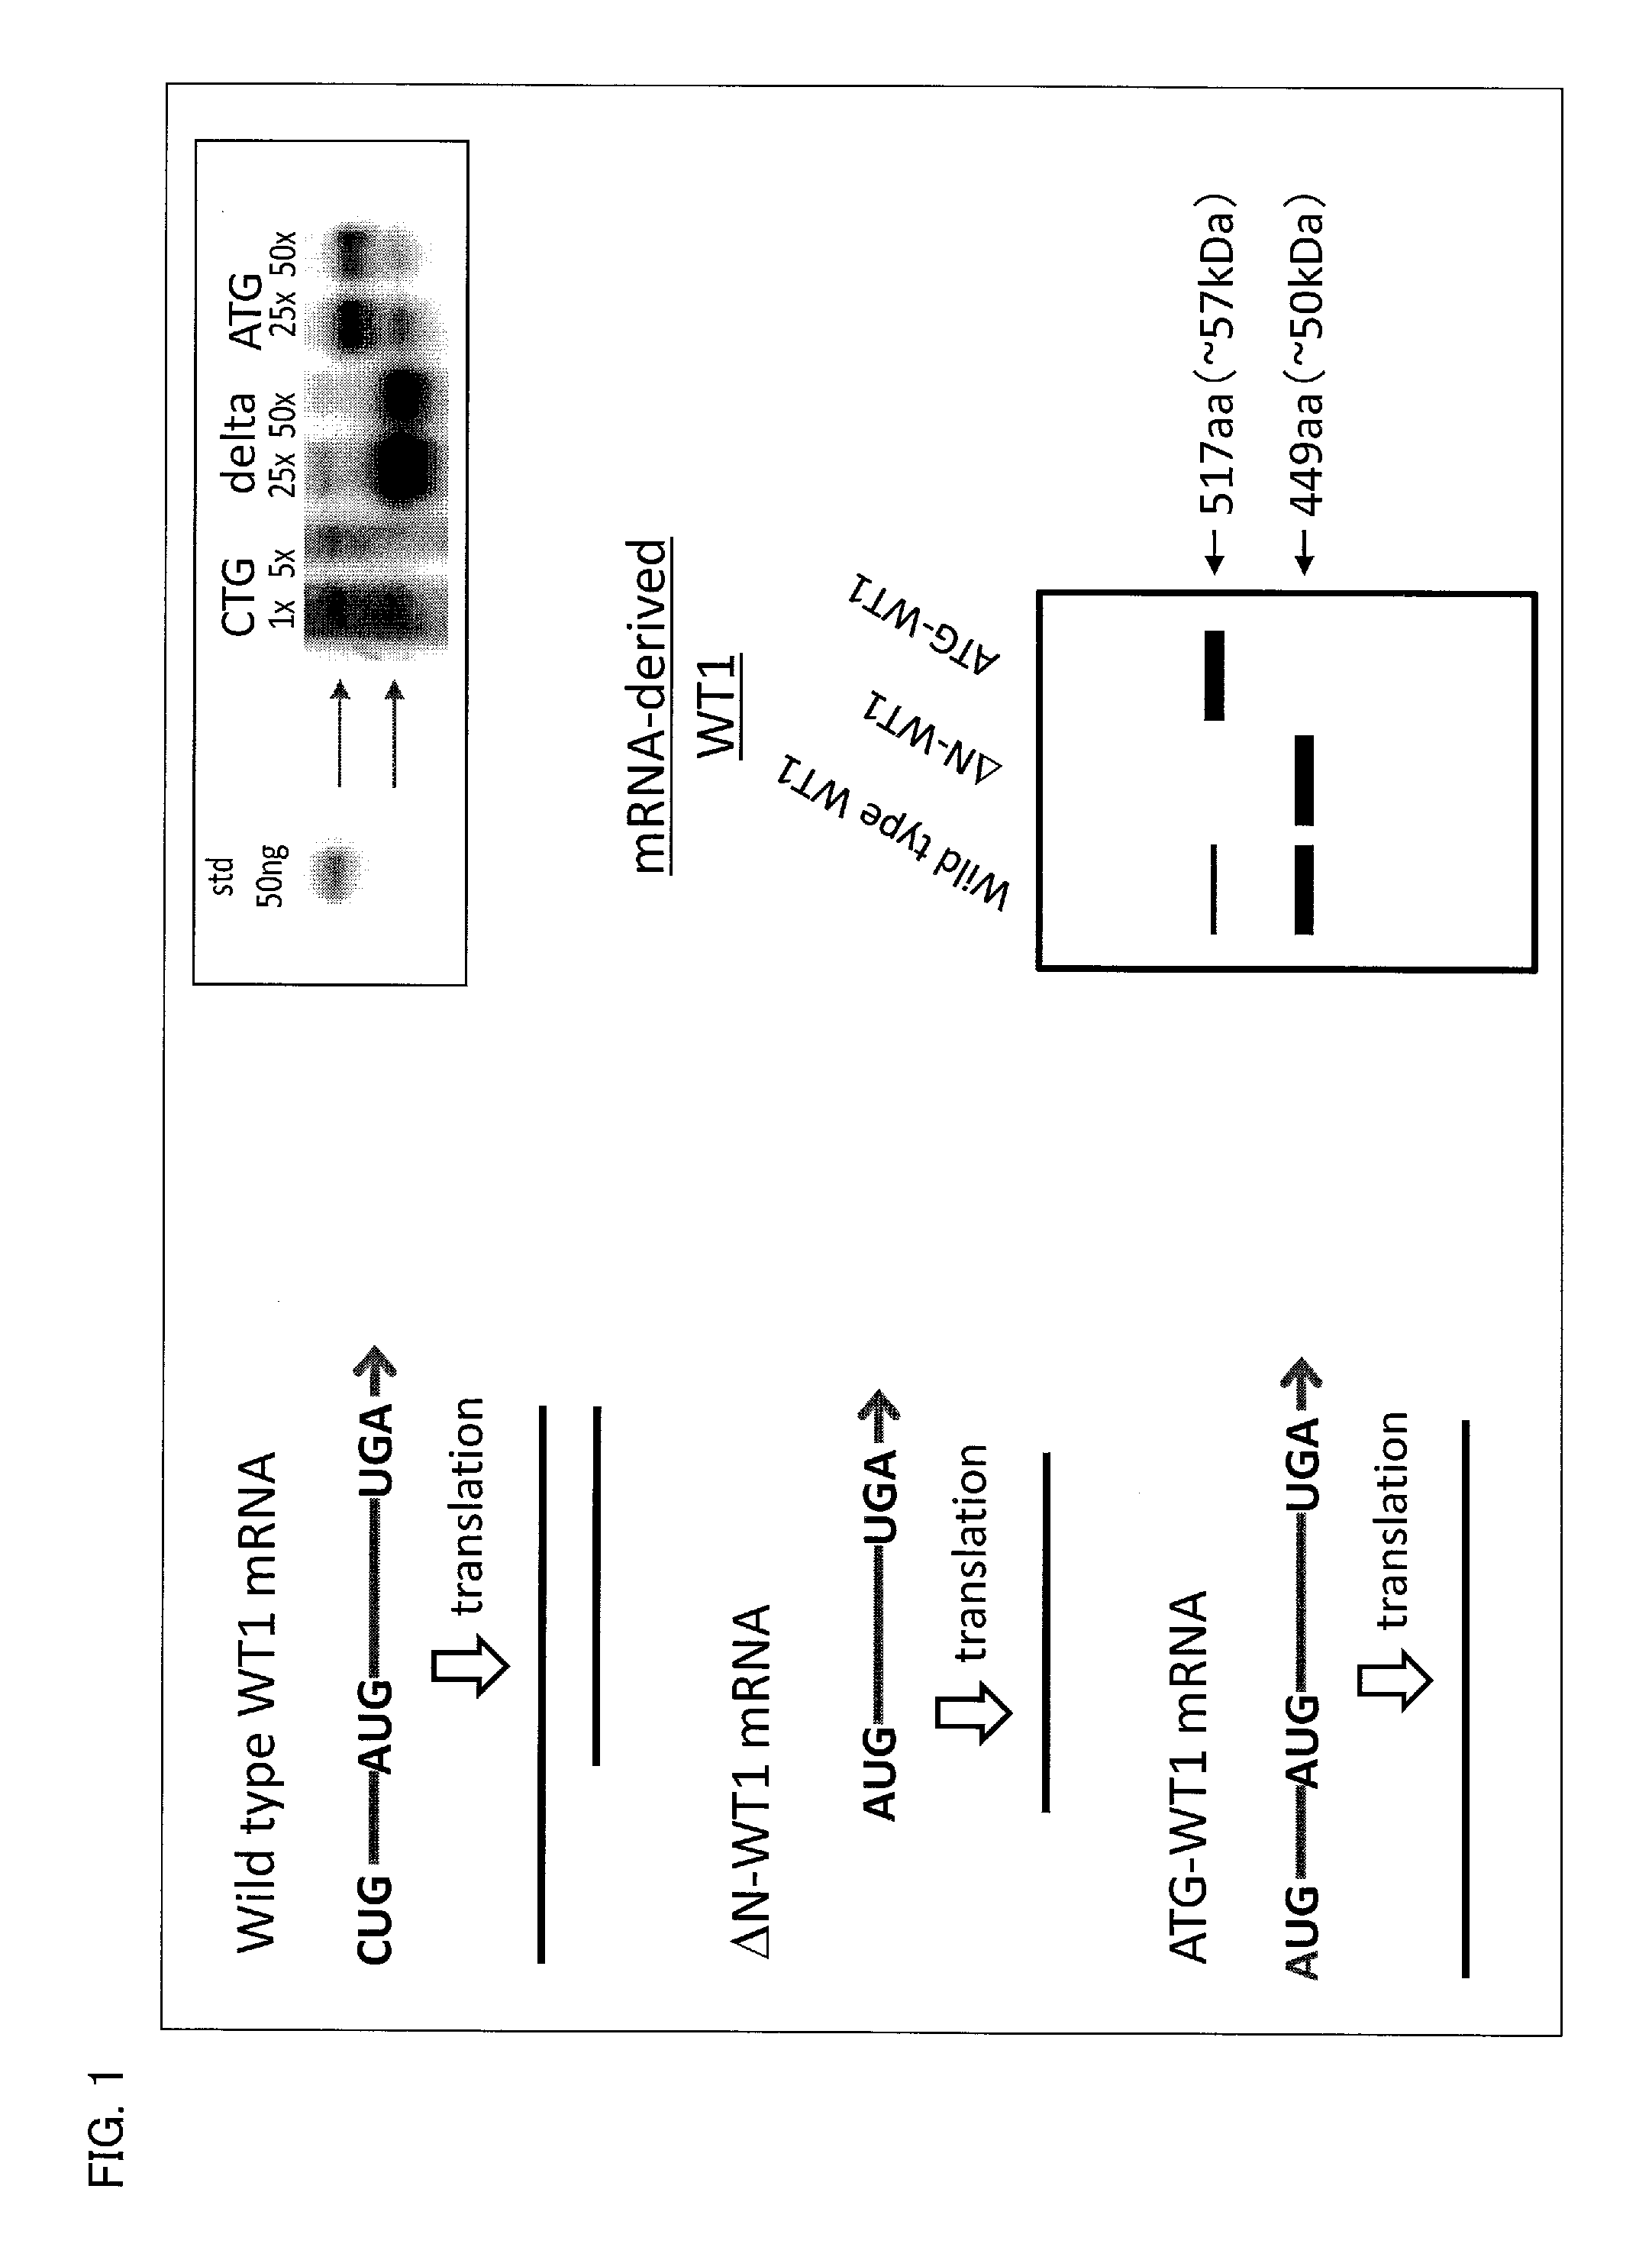 Cell for use in immunotherapy which contains modified nucleic acid construct encoding wilms tumor gene product or fragment thereof, method for producing said cell, and said nucleic acid construct